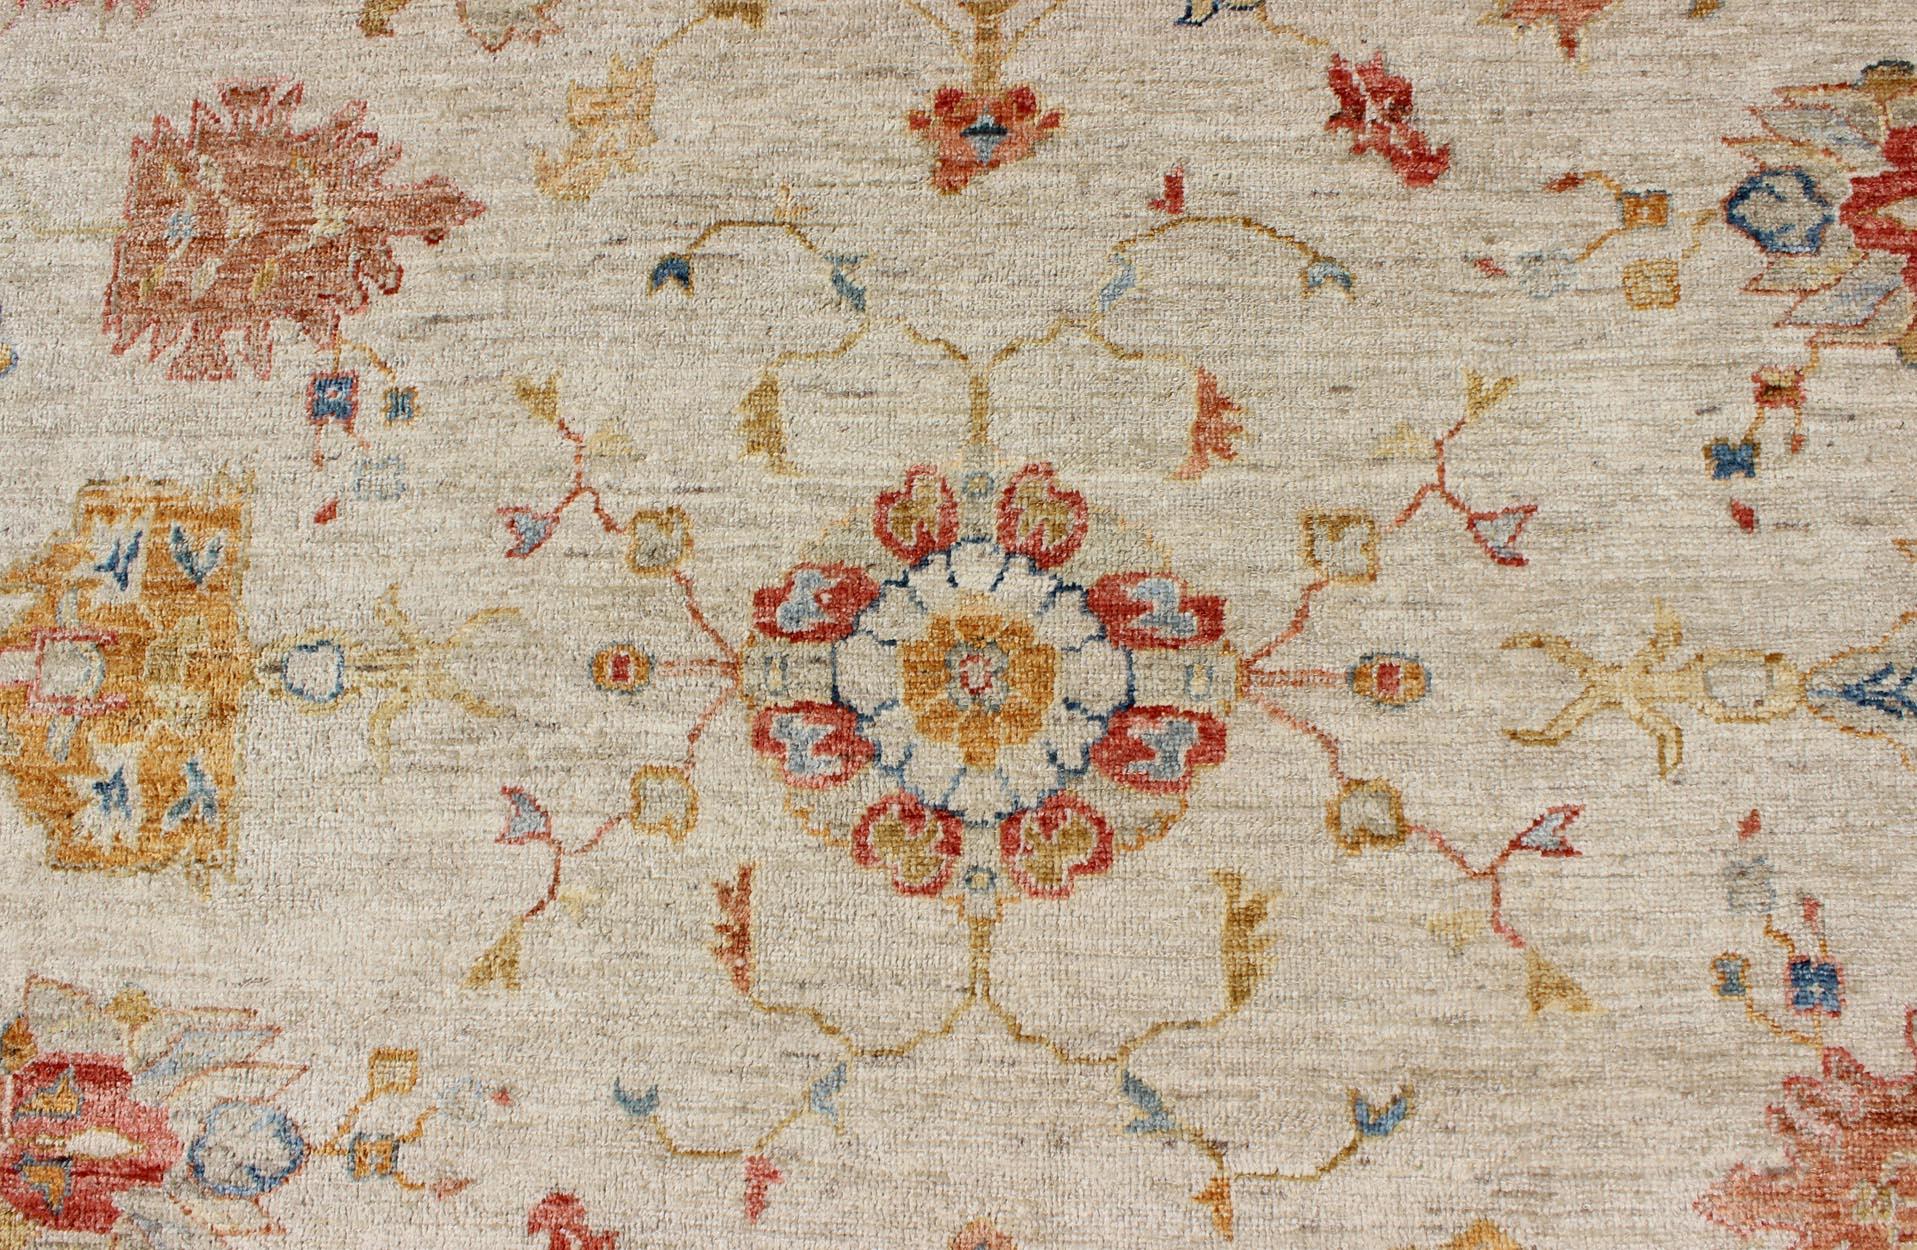 Hand-Knotted Keivan Woven Arts Large Angora Oushak Rug in Colorful Palette  11' 11 x 17' 8  For Sale